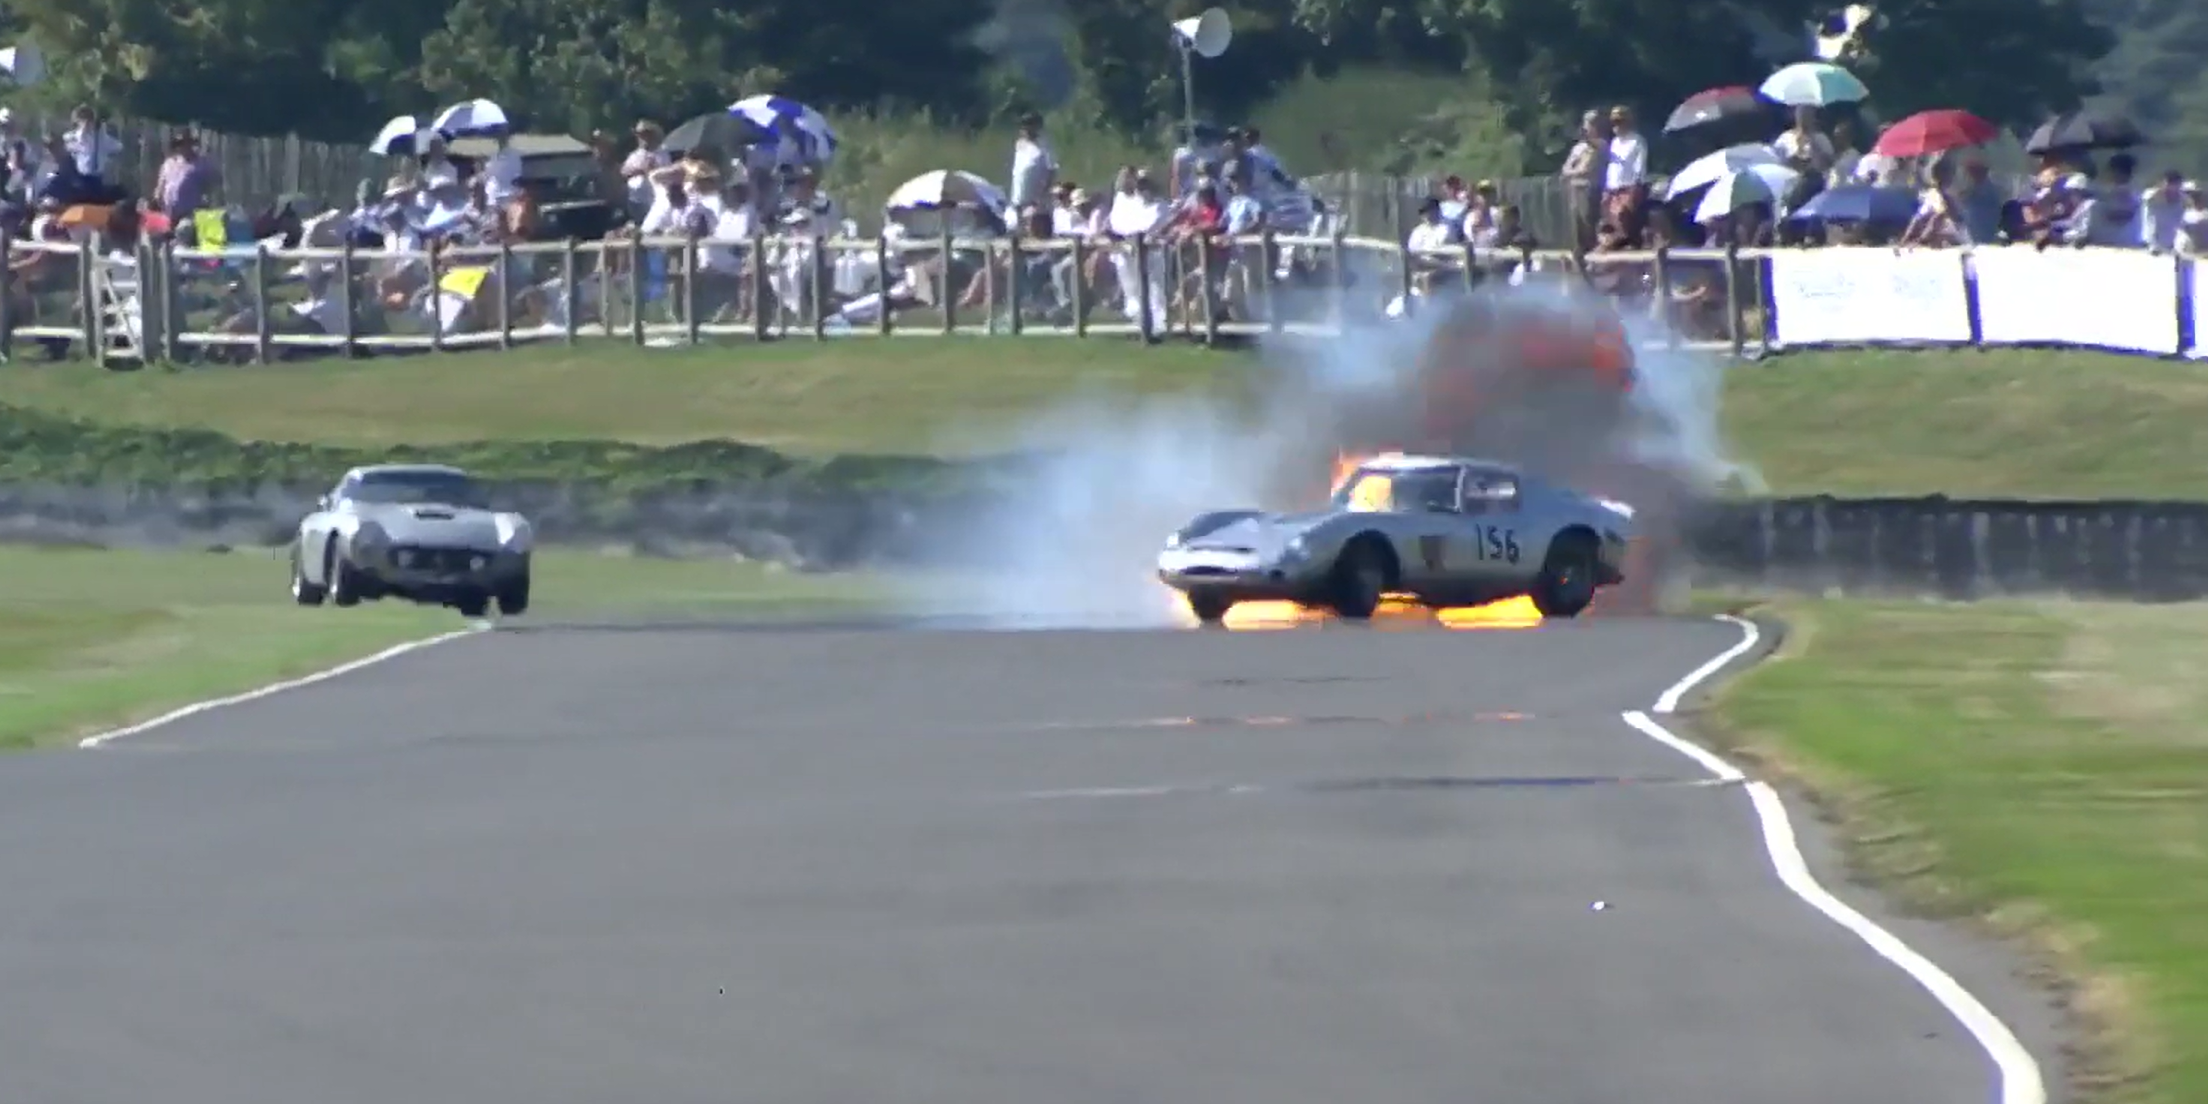 Ferrari 250 GTO Catches Fire, Spins On Own Oil, Survives